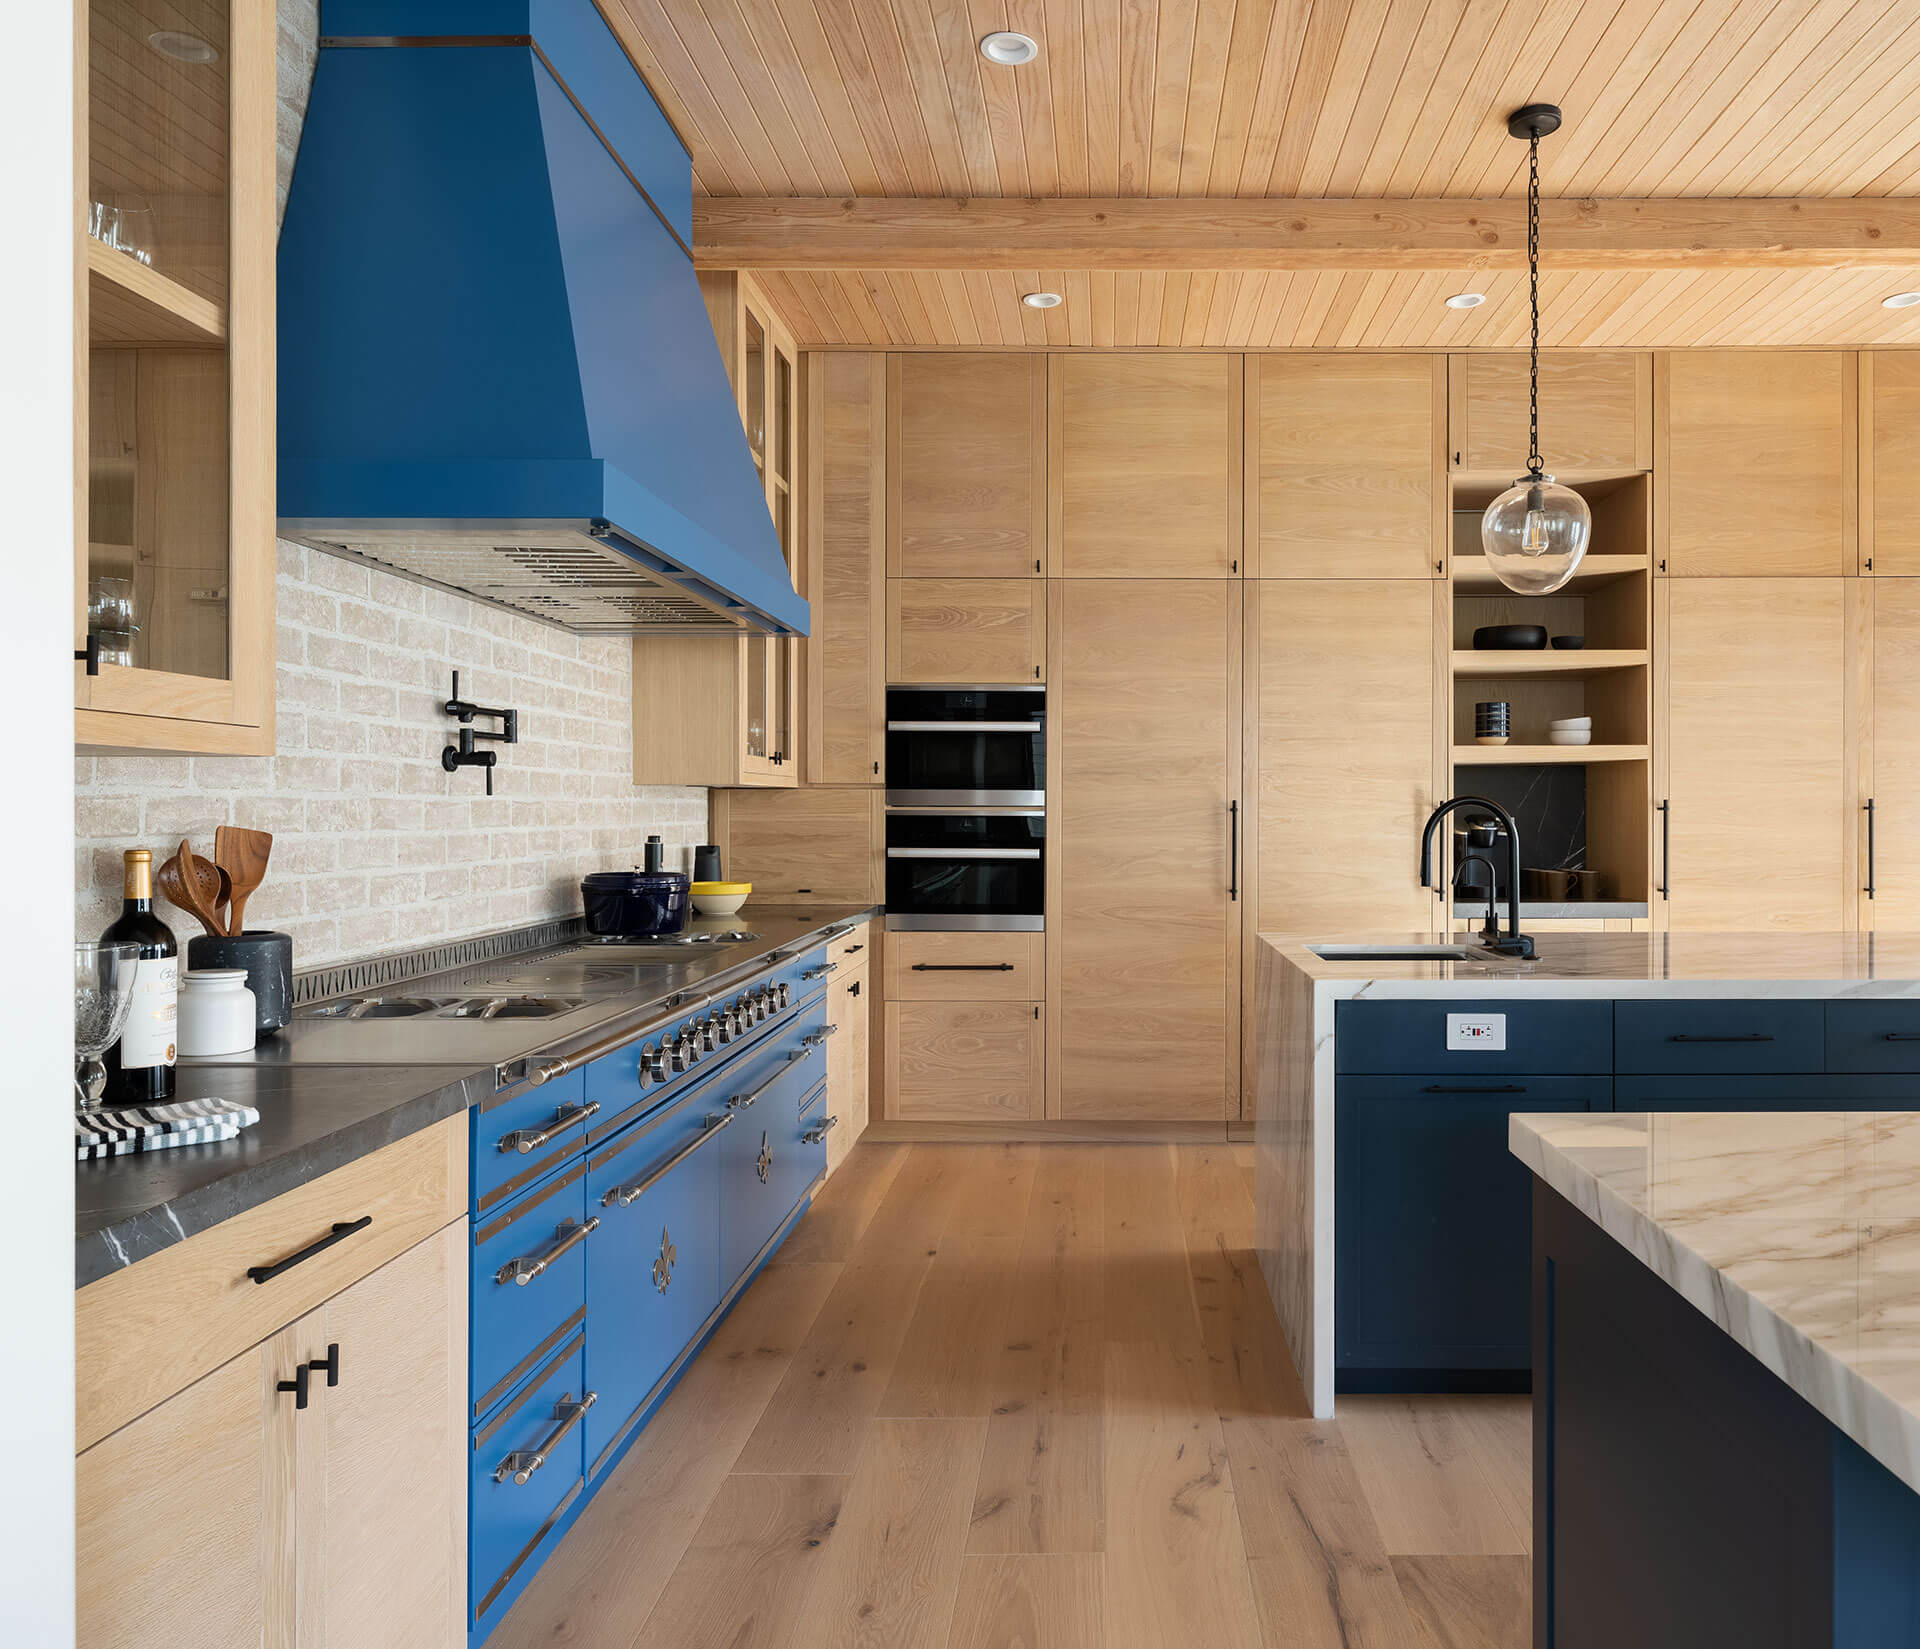 Wooden kitchen cabinets with wall mounted oven and blue French kitchen ranges and blue custom kitchen hood